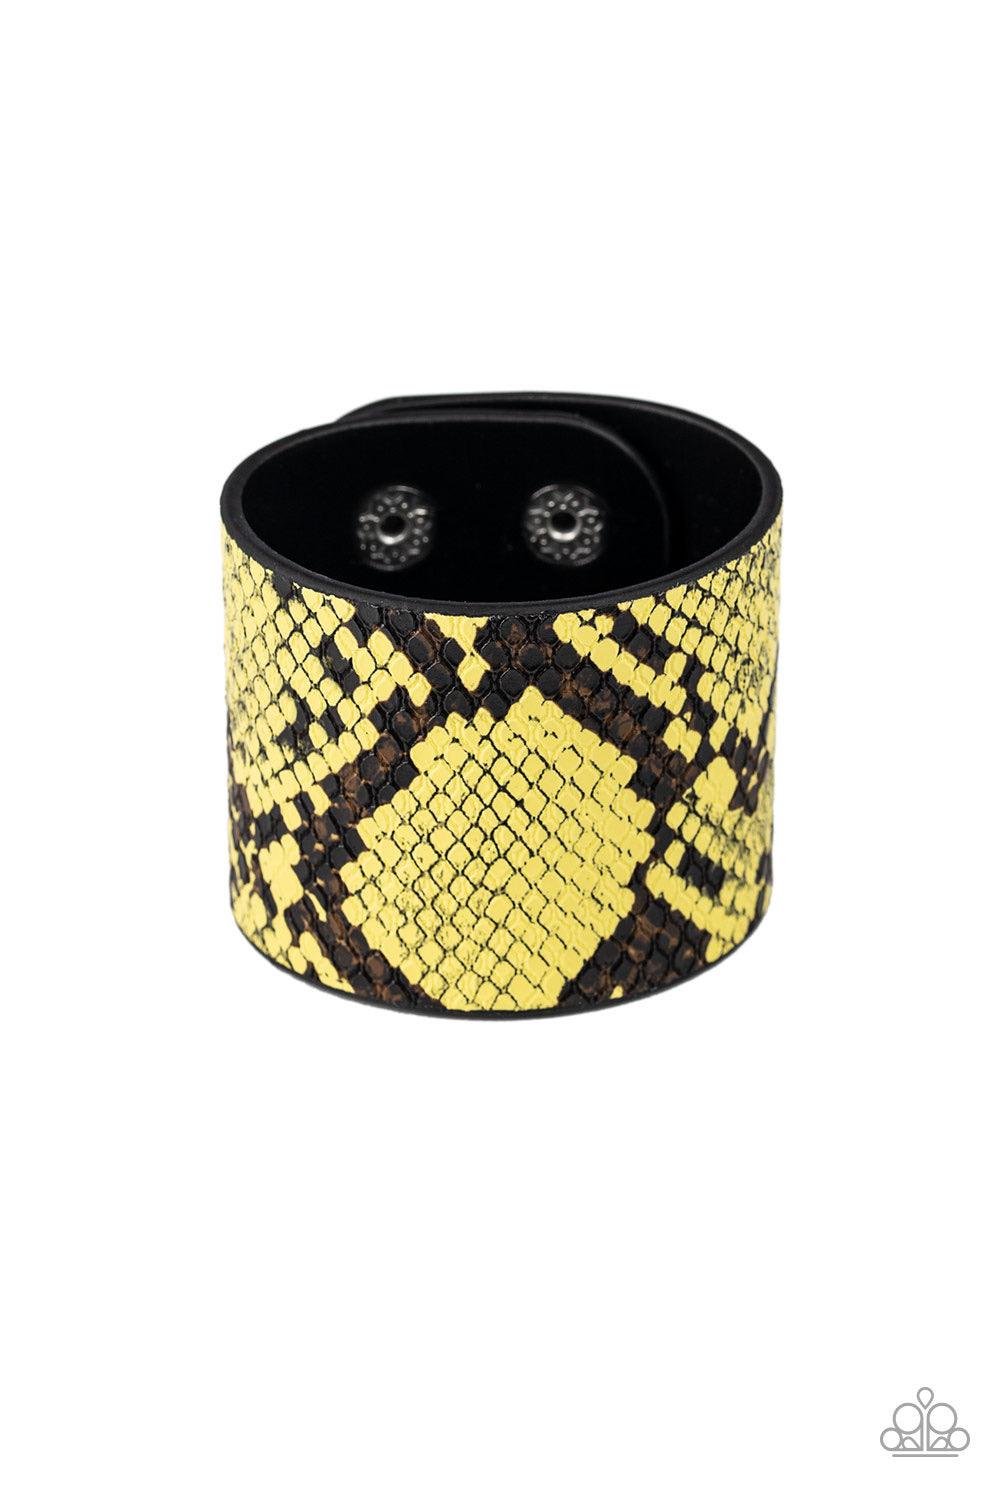 Paparazzi Accessories The Rest Is HISS-Tory - Yellow Featuring vibrant yellow and black python print, a thick black leather band wraps around the wrist for a wild fashion. Features an adjustable snap closure. Jewelry